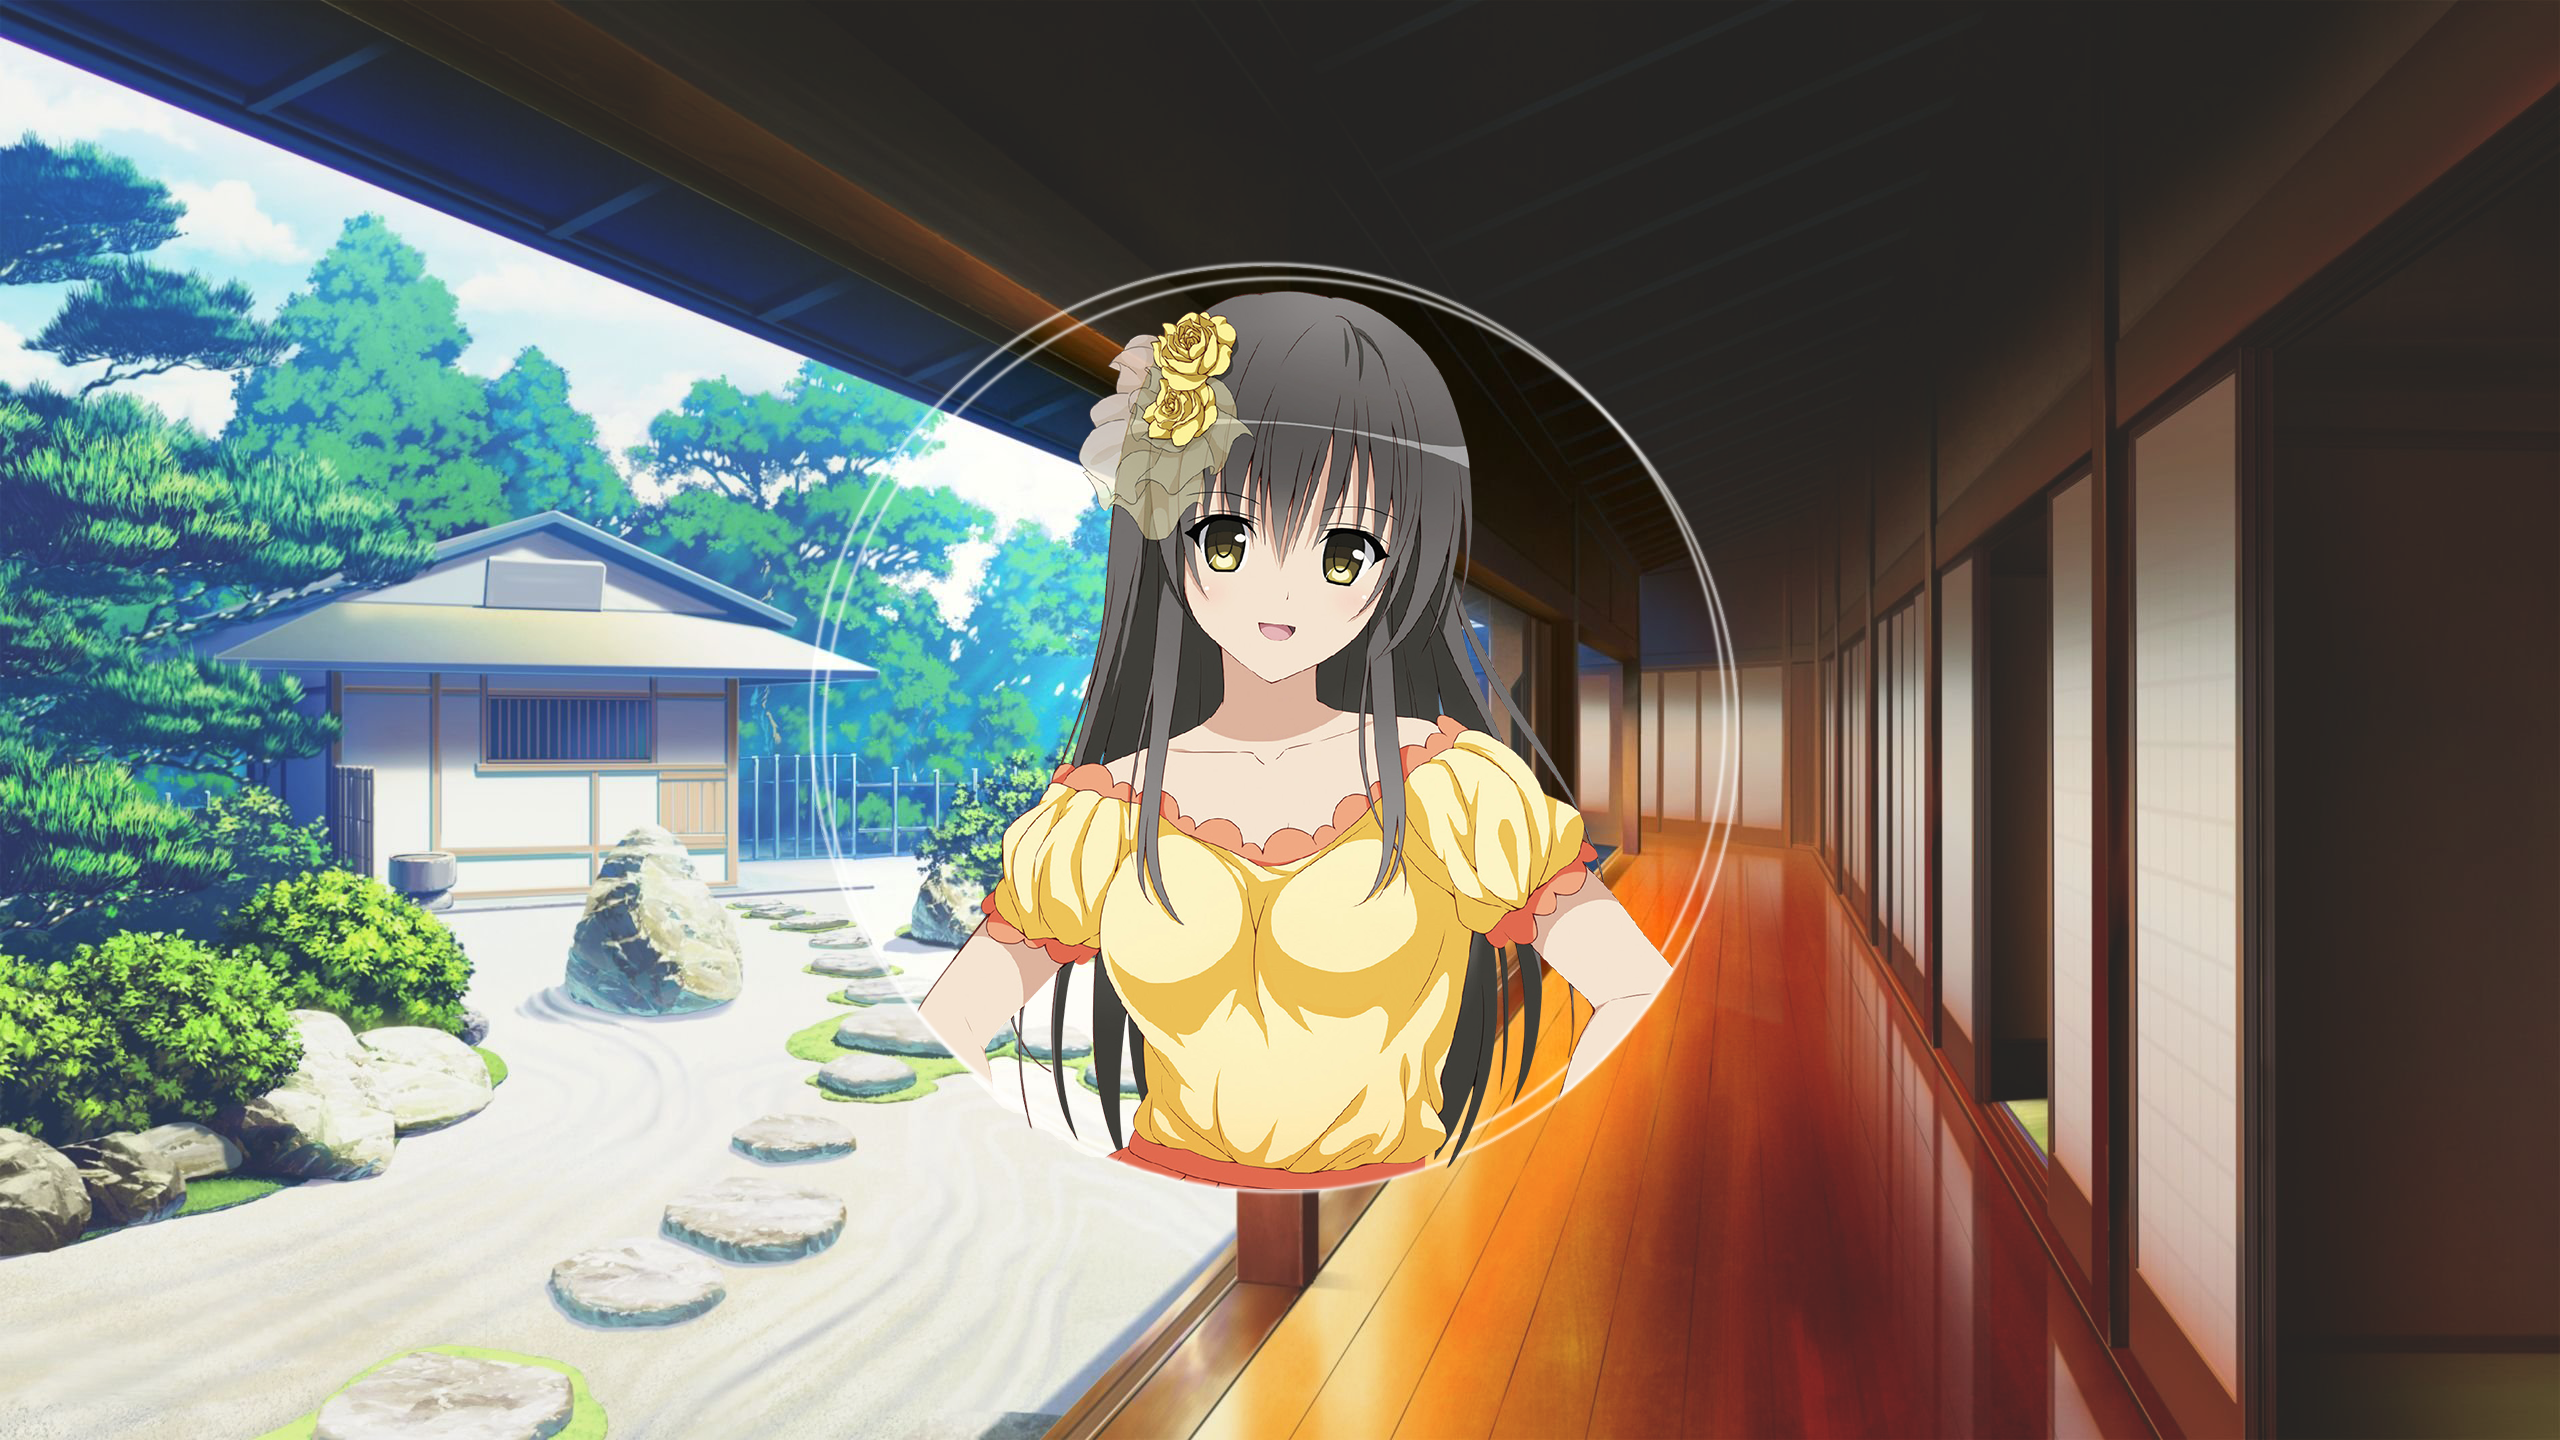 Anime 2560x1440 anime anime girls Japan summer To Love-ru Kotegawa Yui black hair picture-in-picture flower in hair long hair 2D